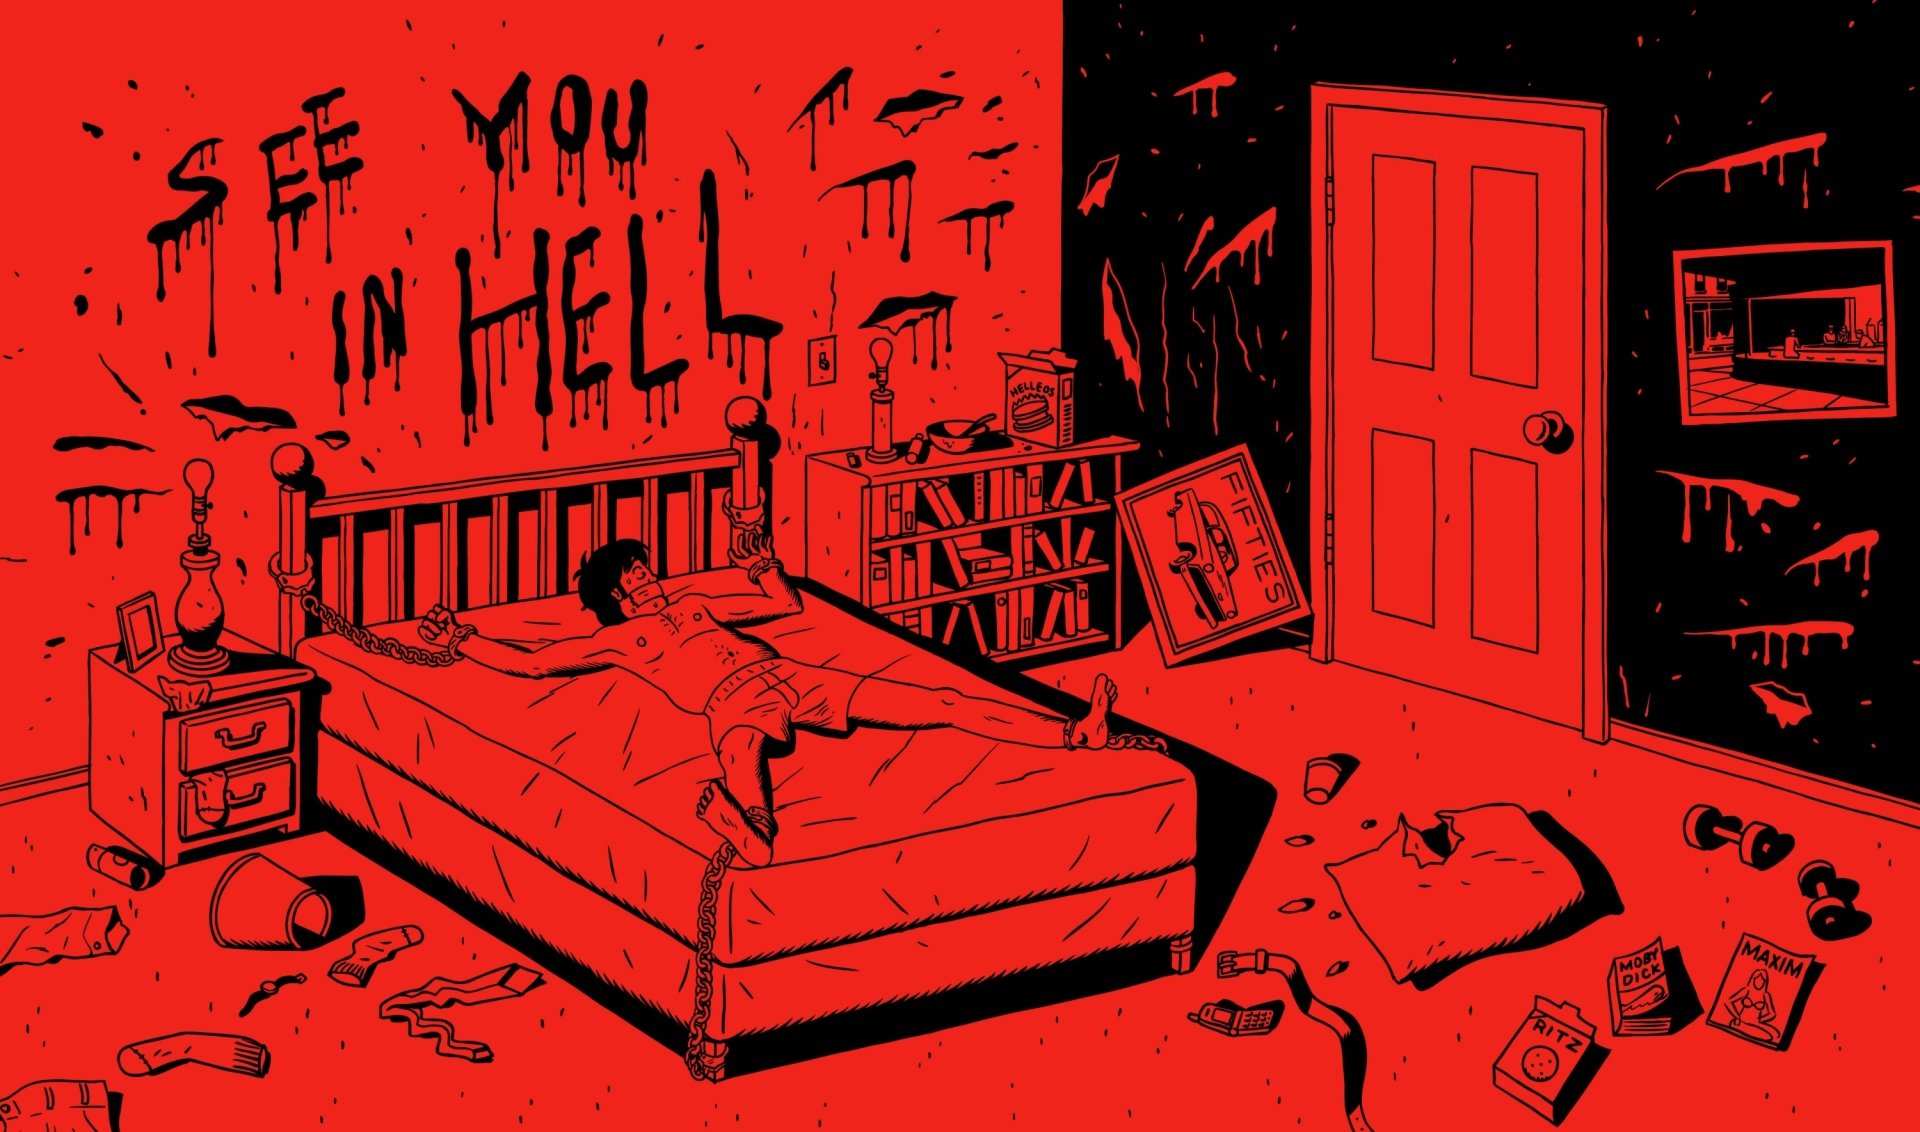 Ugly Americans Wallpapers